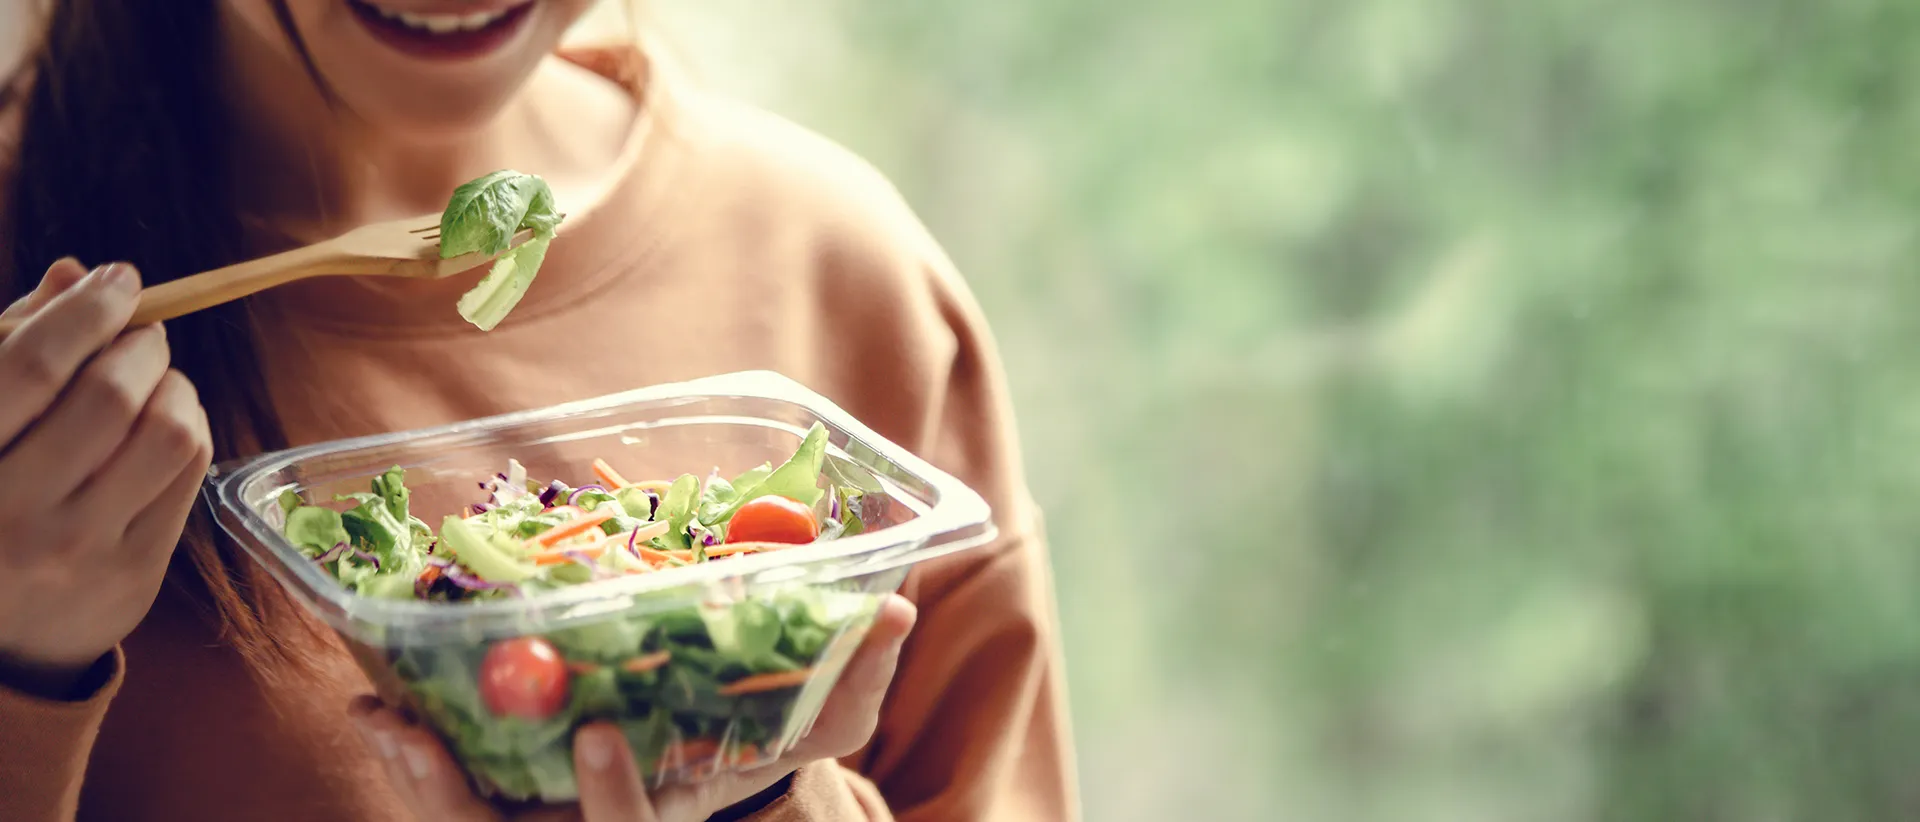 A girl eating a bowl of salad - summer diet plan.